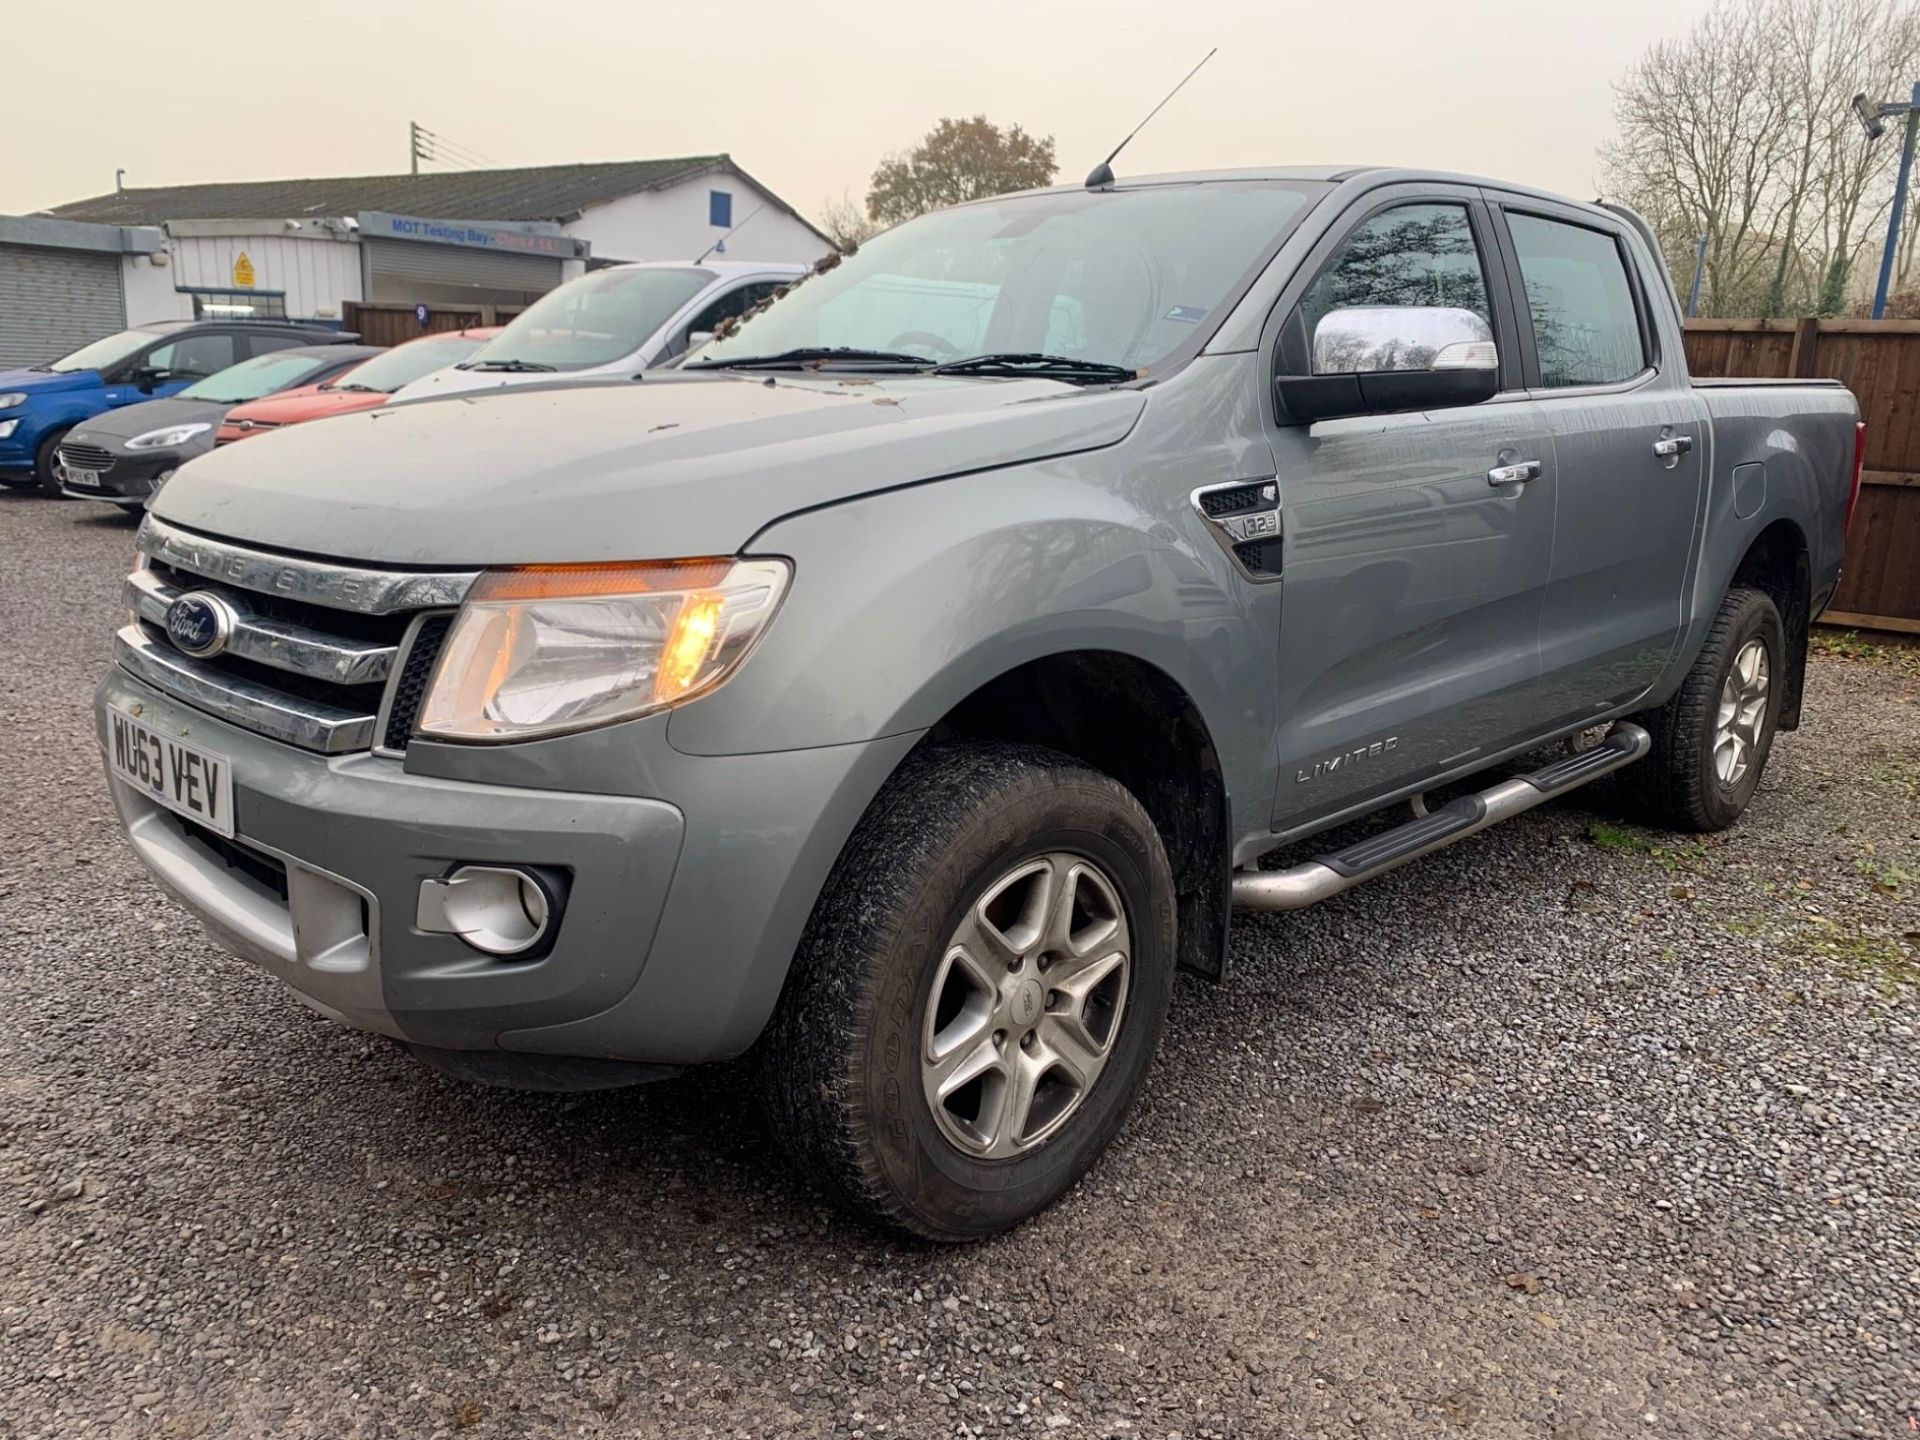 FORD RANGER 3.2 TDCI LIMITED DOUBLE CAB PICKUP - Image 2 of 11